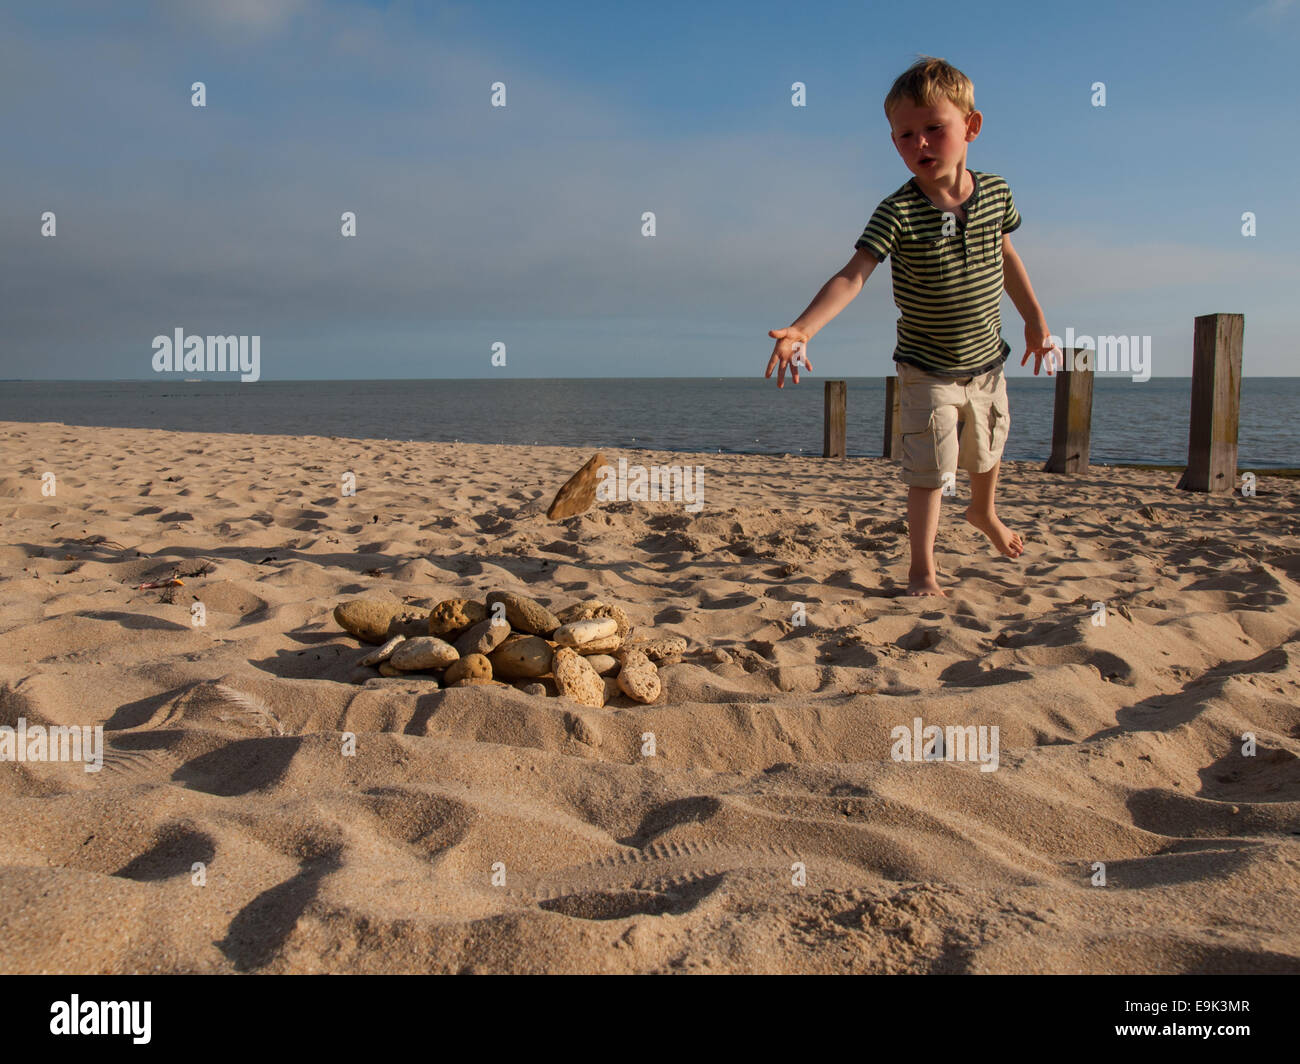 small boy collecting stones on a sandy beach Stock Photo